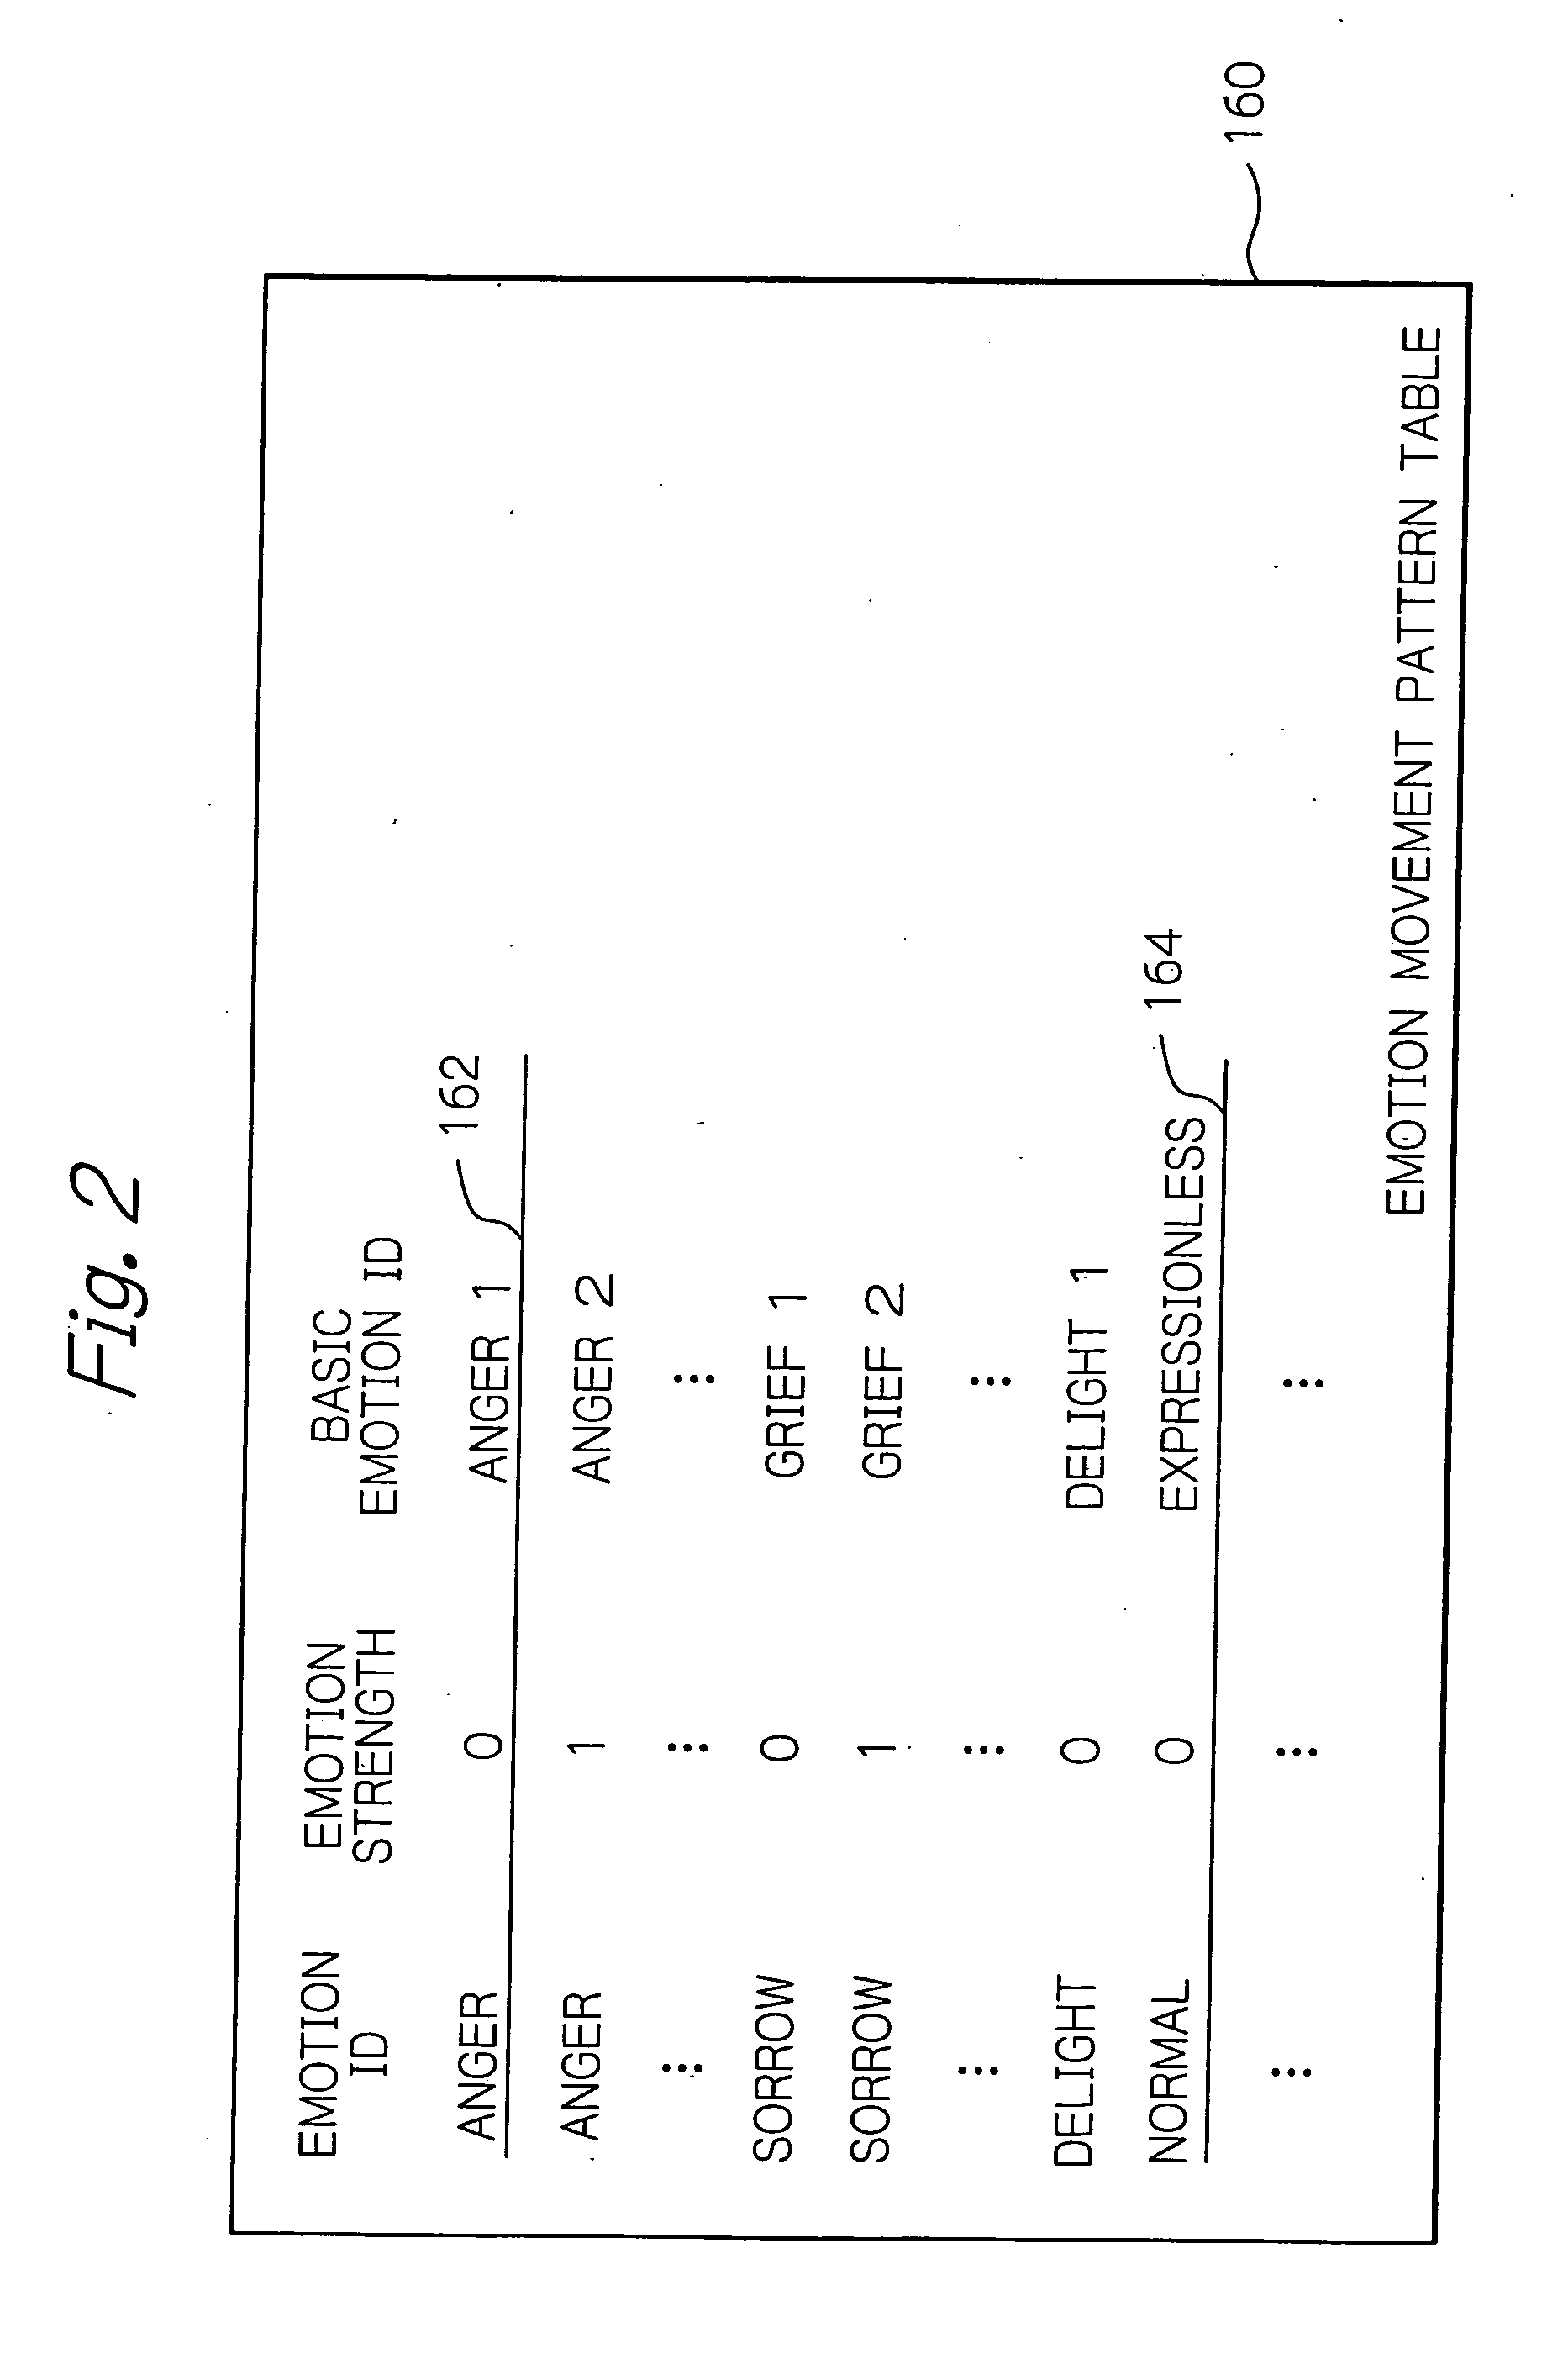 Image communication system for compositing an image according to emotion input